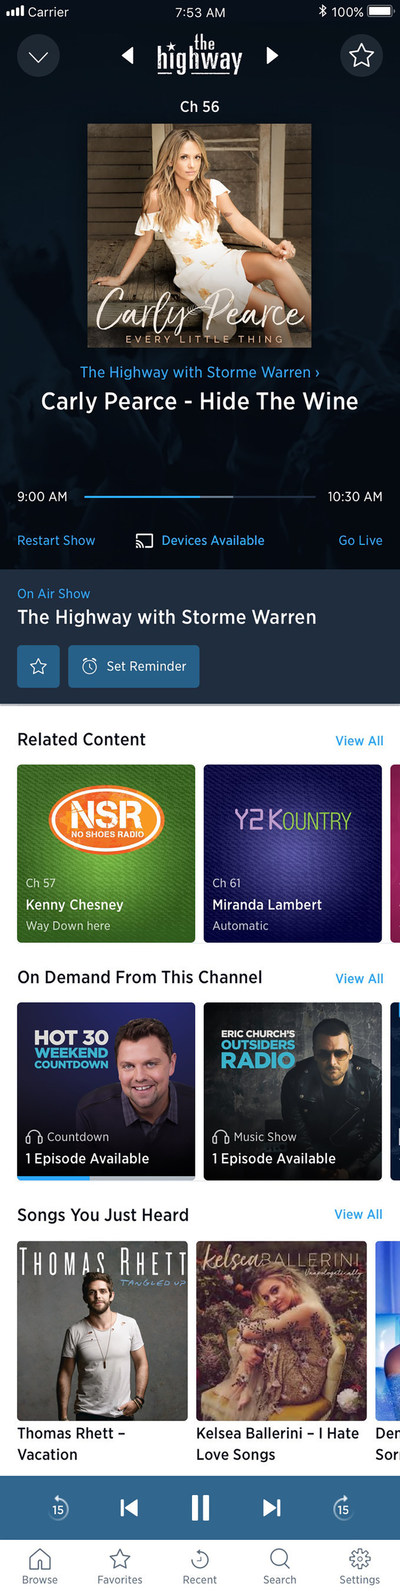 The SiriusXM app features a brand-new look and capabilities that help users find more of what they like across SiriusXM’s 200+ channels. (Phone, scrolling view) (CNW Group/Sirius XM Canada Inc.)